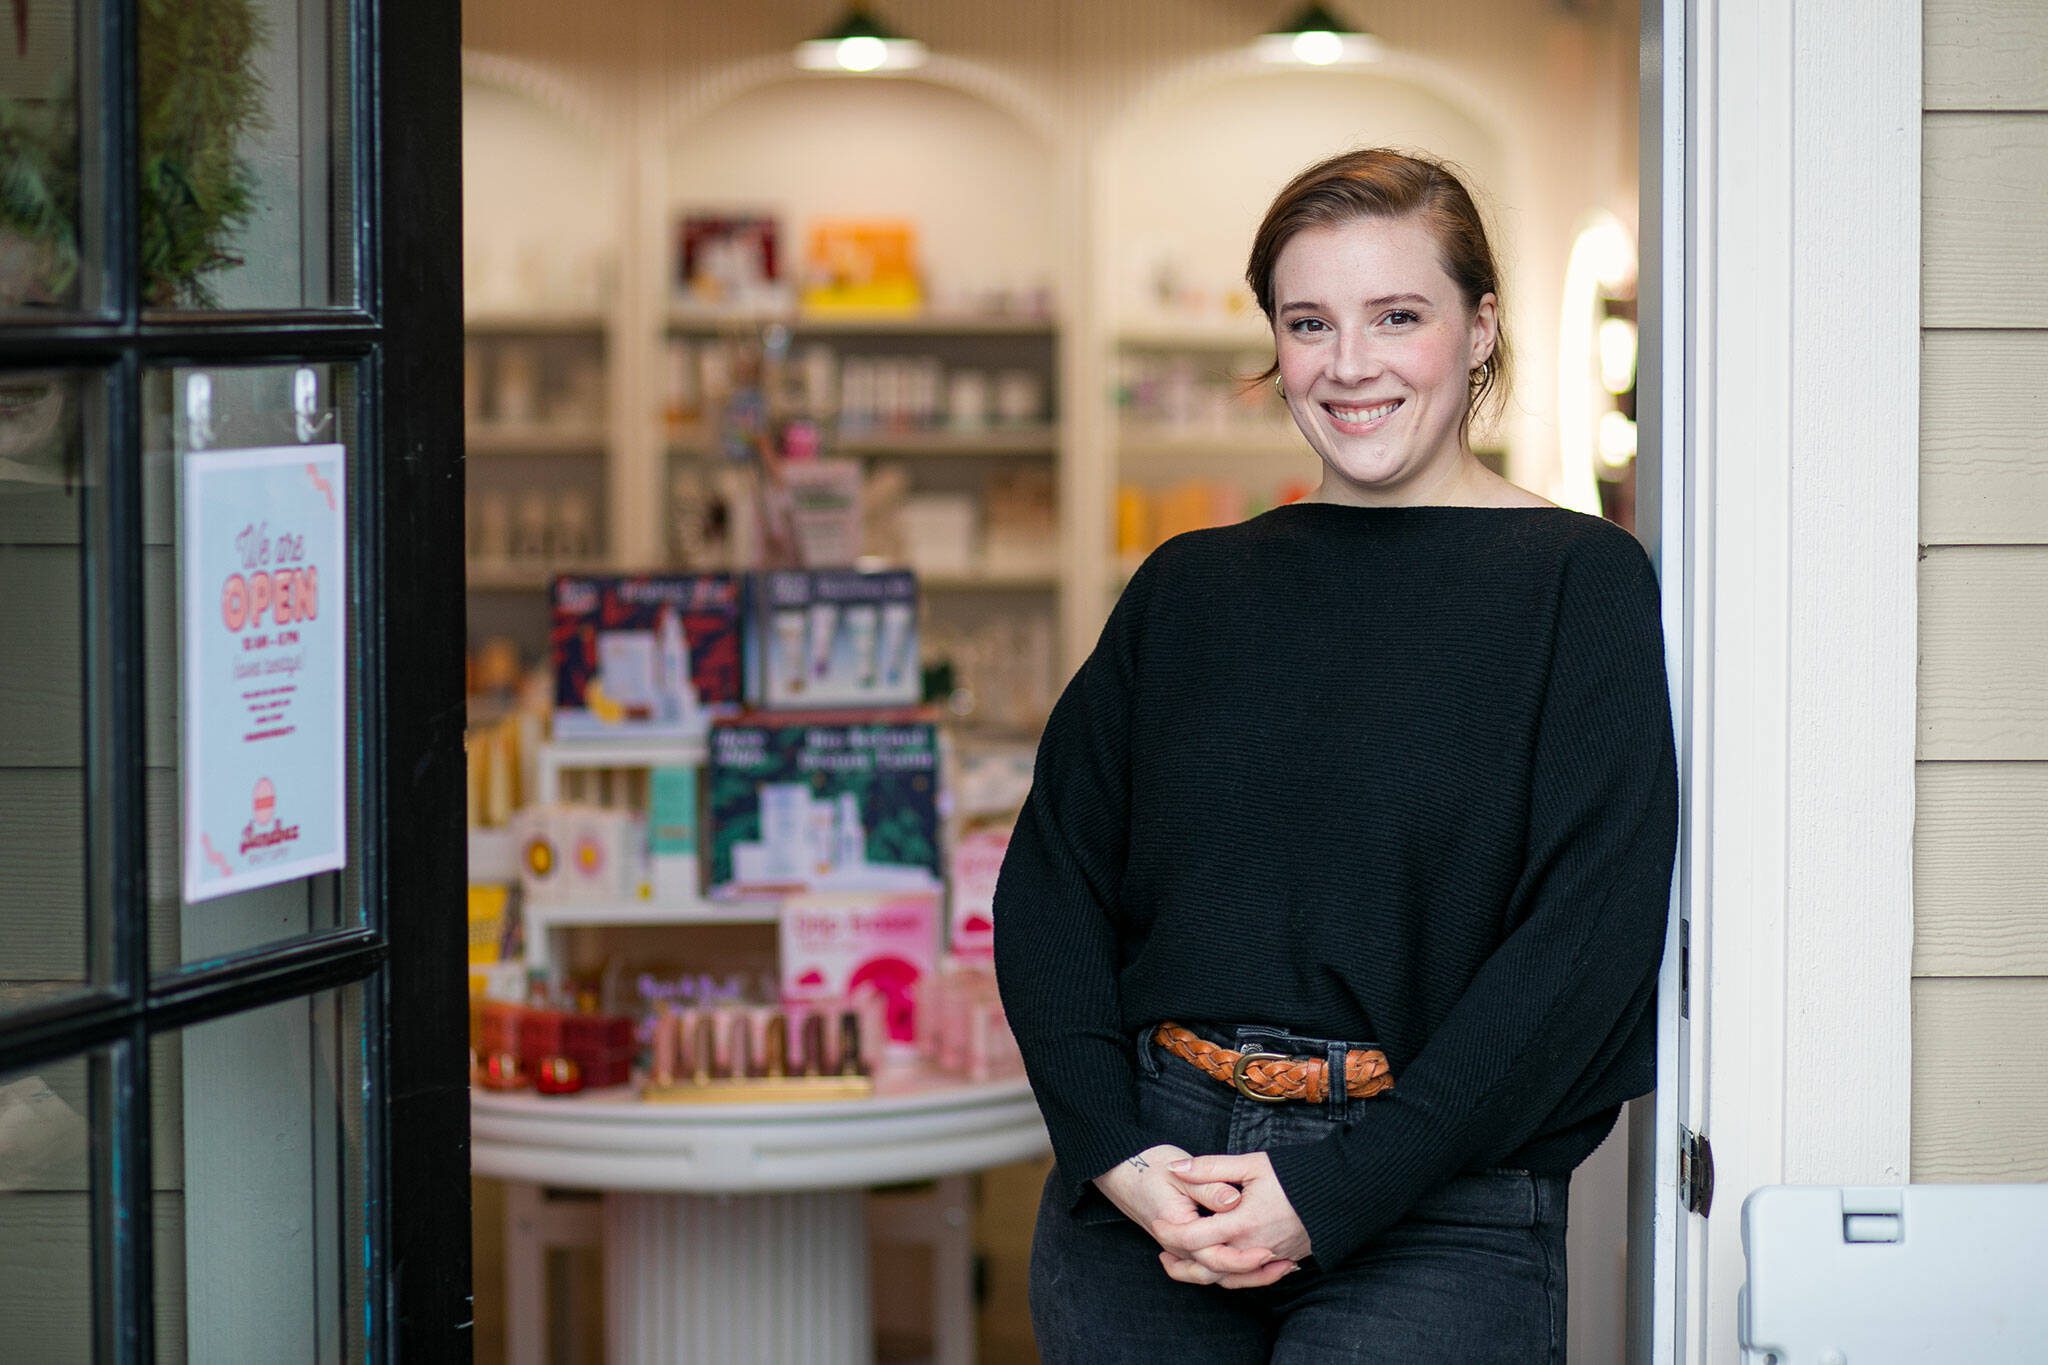 Sarah Jean Muncey-Gordon stands in the doorway of her storefront at Bandbox Beauty Supply in Langley. Bandbox focuses on stocking independent, cruelty-free, women- and minority-owned beauty brands. (Ryan Berry / The Herald)